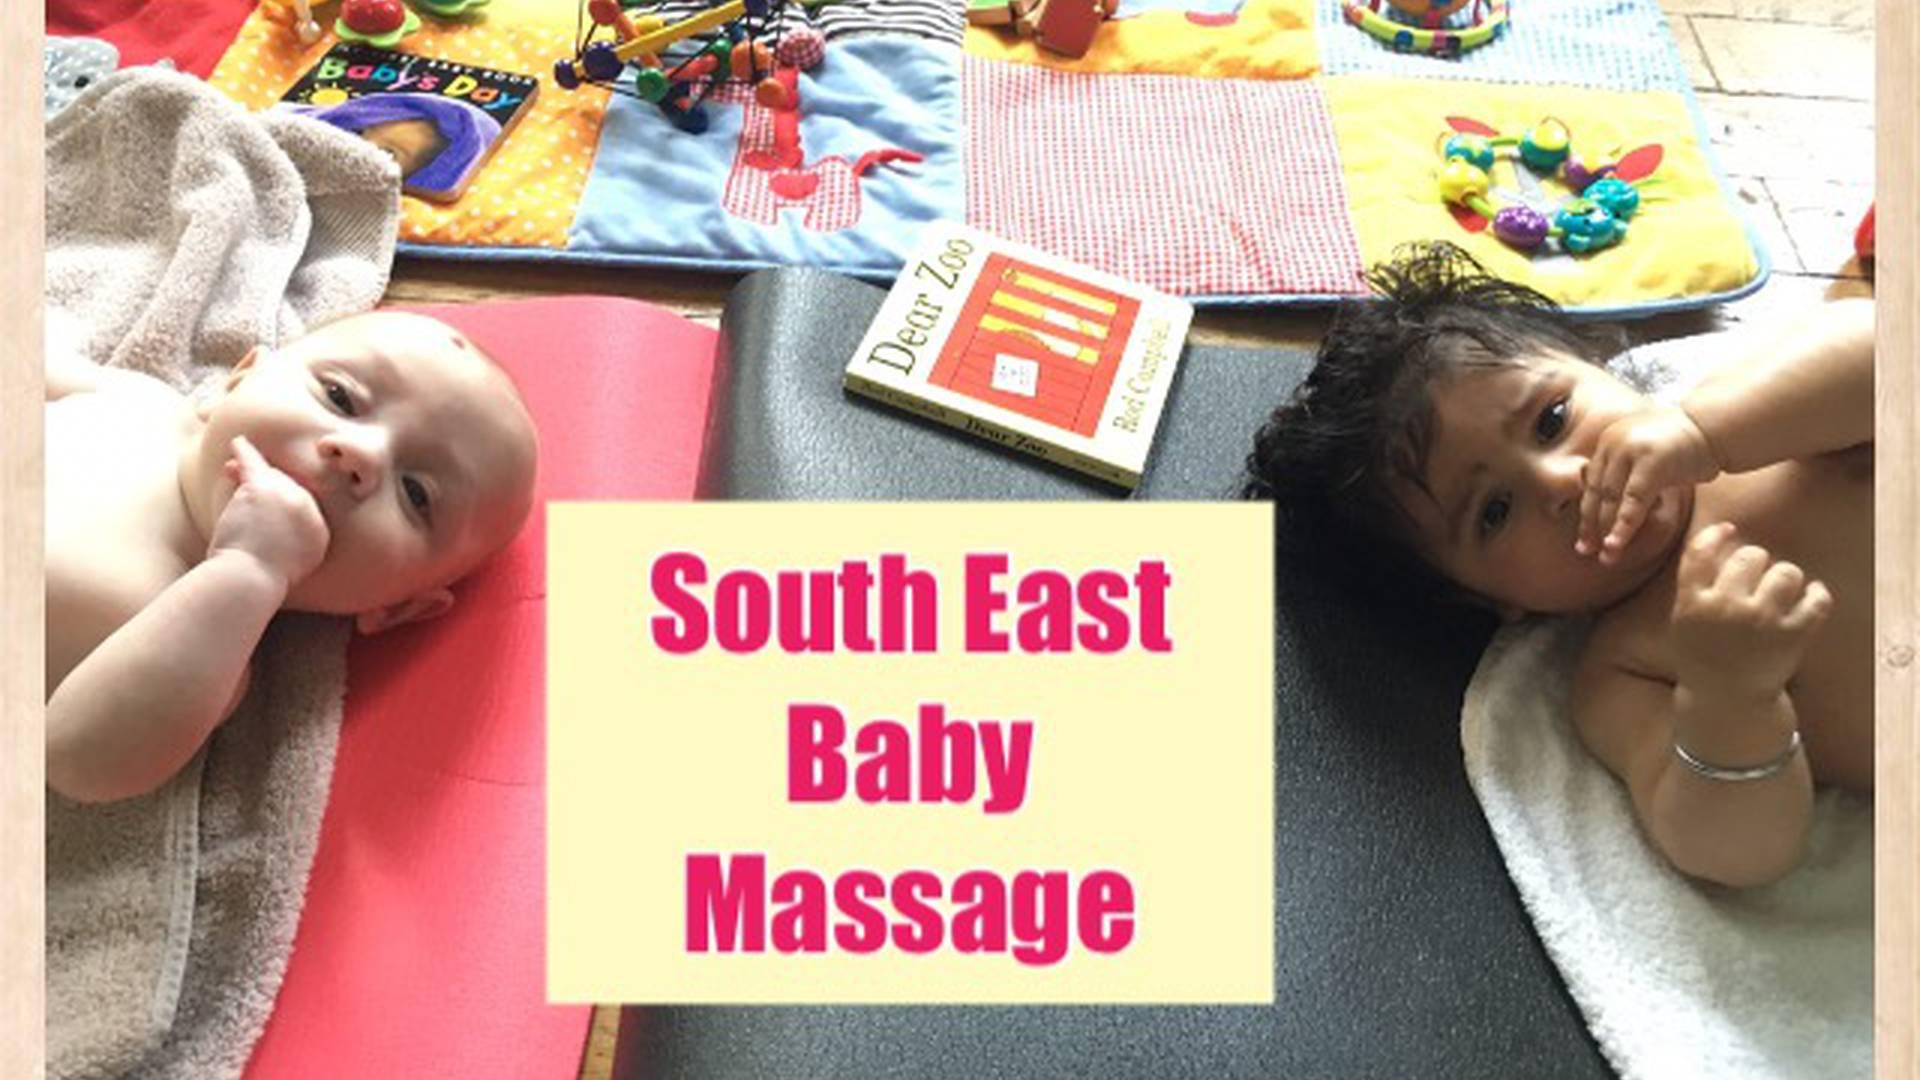 South East Baby Massage photo